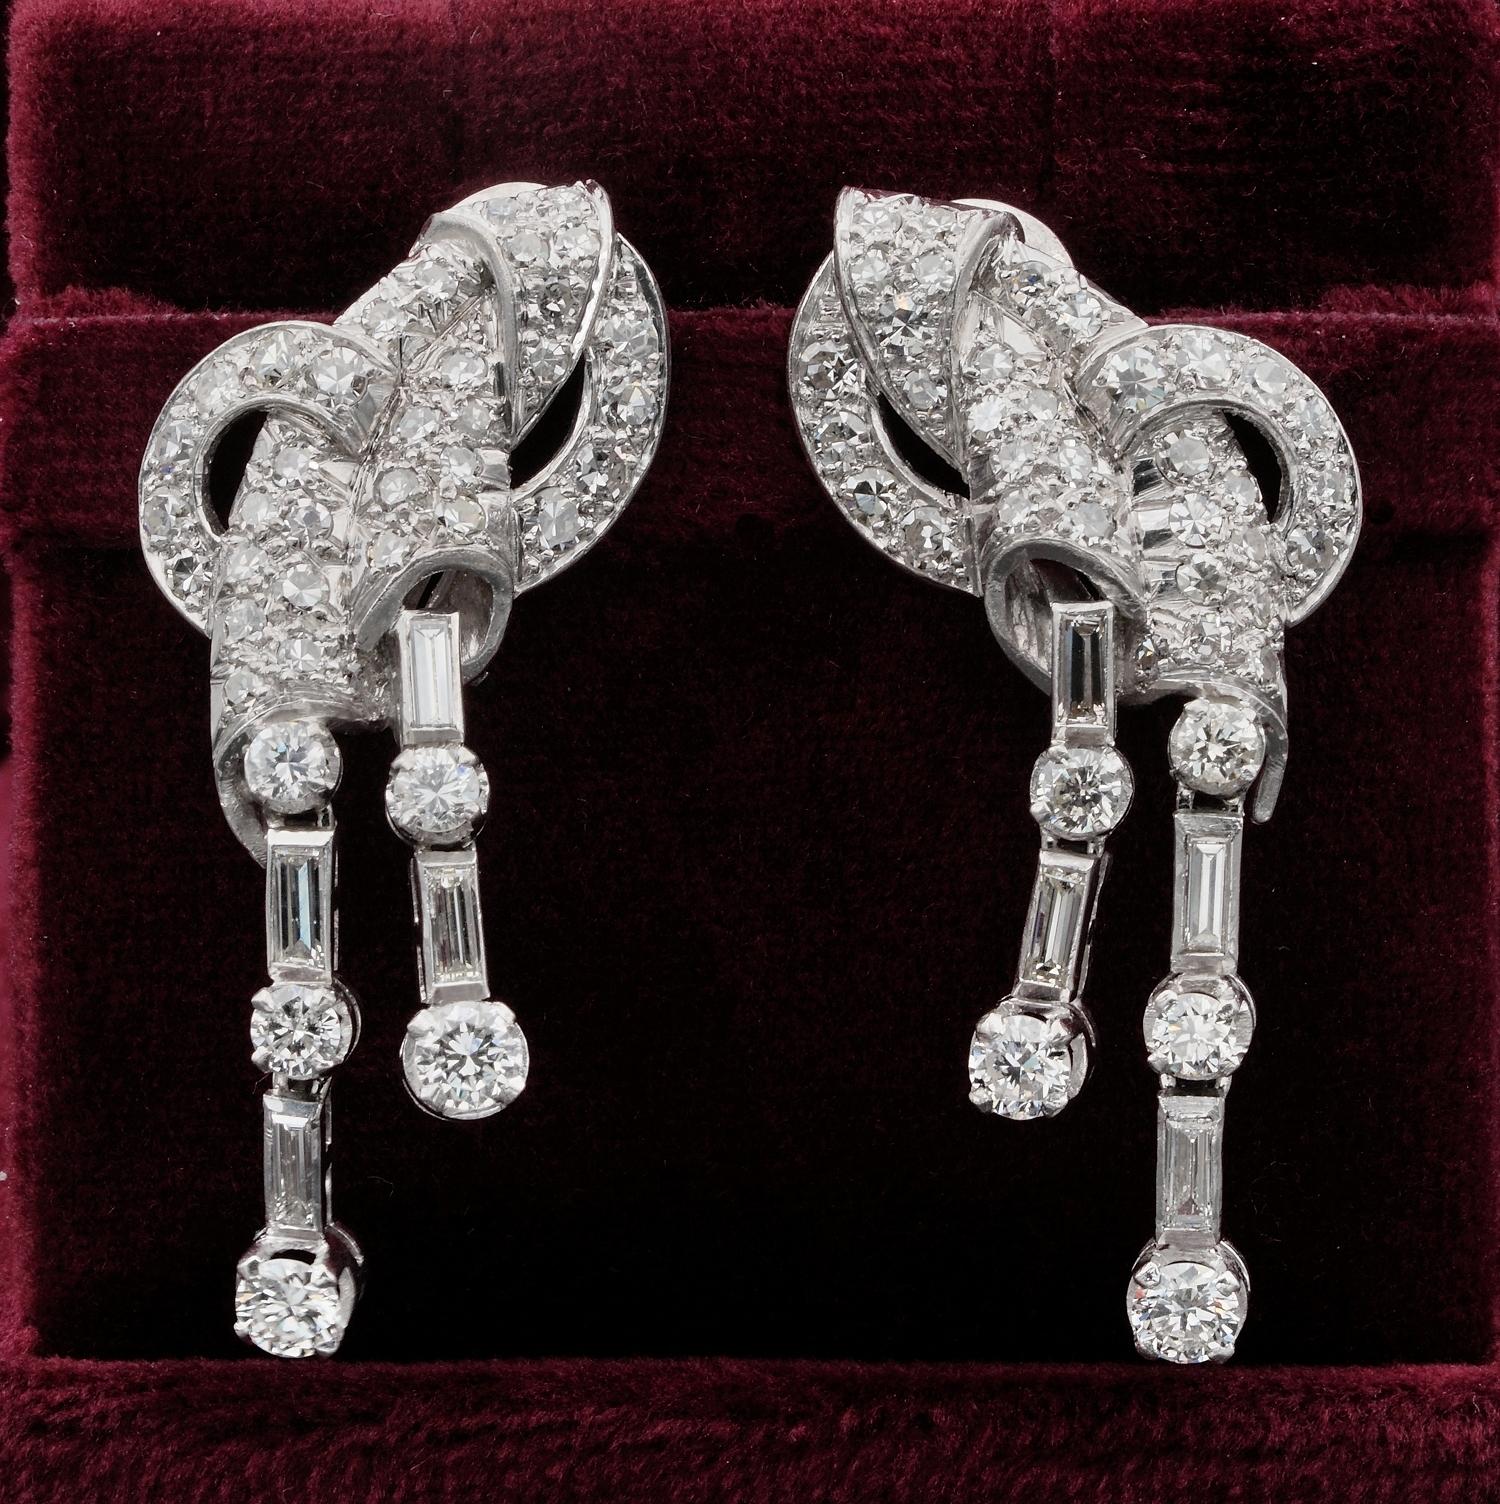 Look at me Appeal

Striking bold design from the art Deco period, 1925 ca, Platinum made
Bows of sparkling Diamonds with ribbon like cascade richly set with Diamonds
Classy from the Art Deco, wearable with discrete glam 
The intricate bows hold